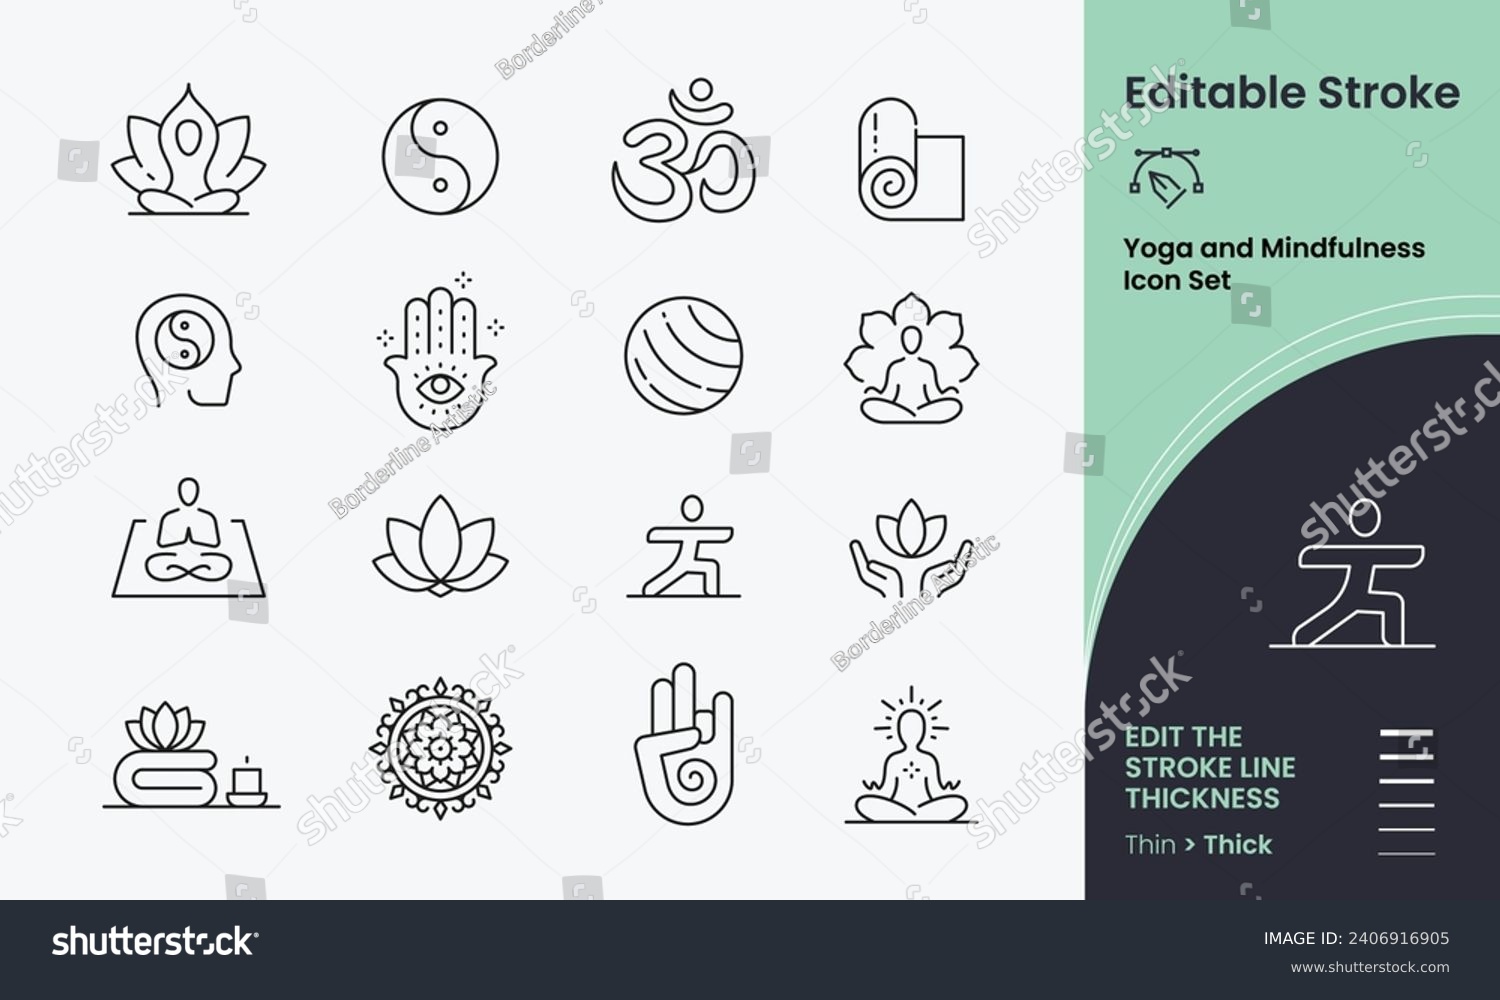 Yoga and Meditation Icon collection containing 16 editable stroke icons. Perfect for logos, stats and infographics. Edit the thickness of the line in any vector capable app. #2406916905